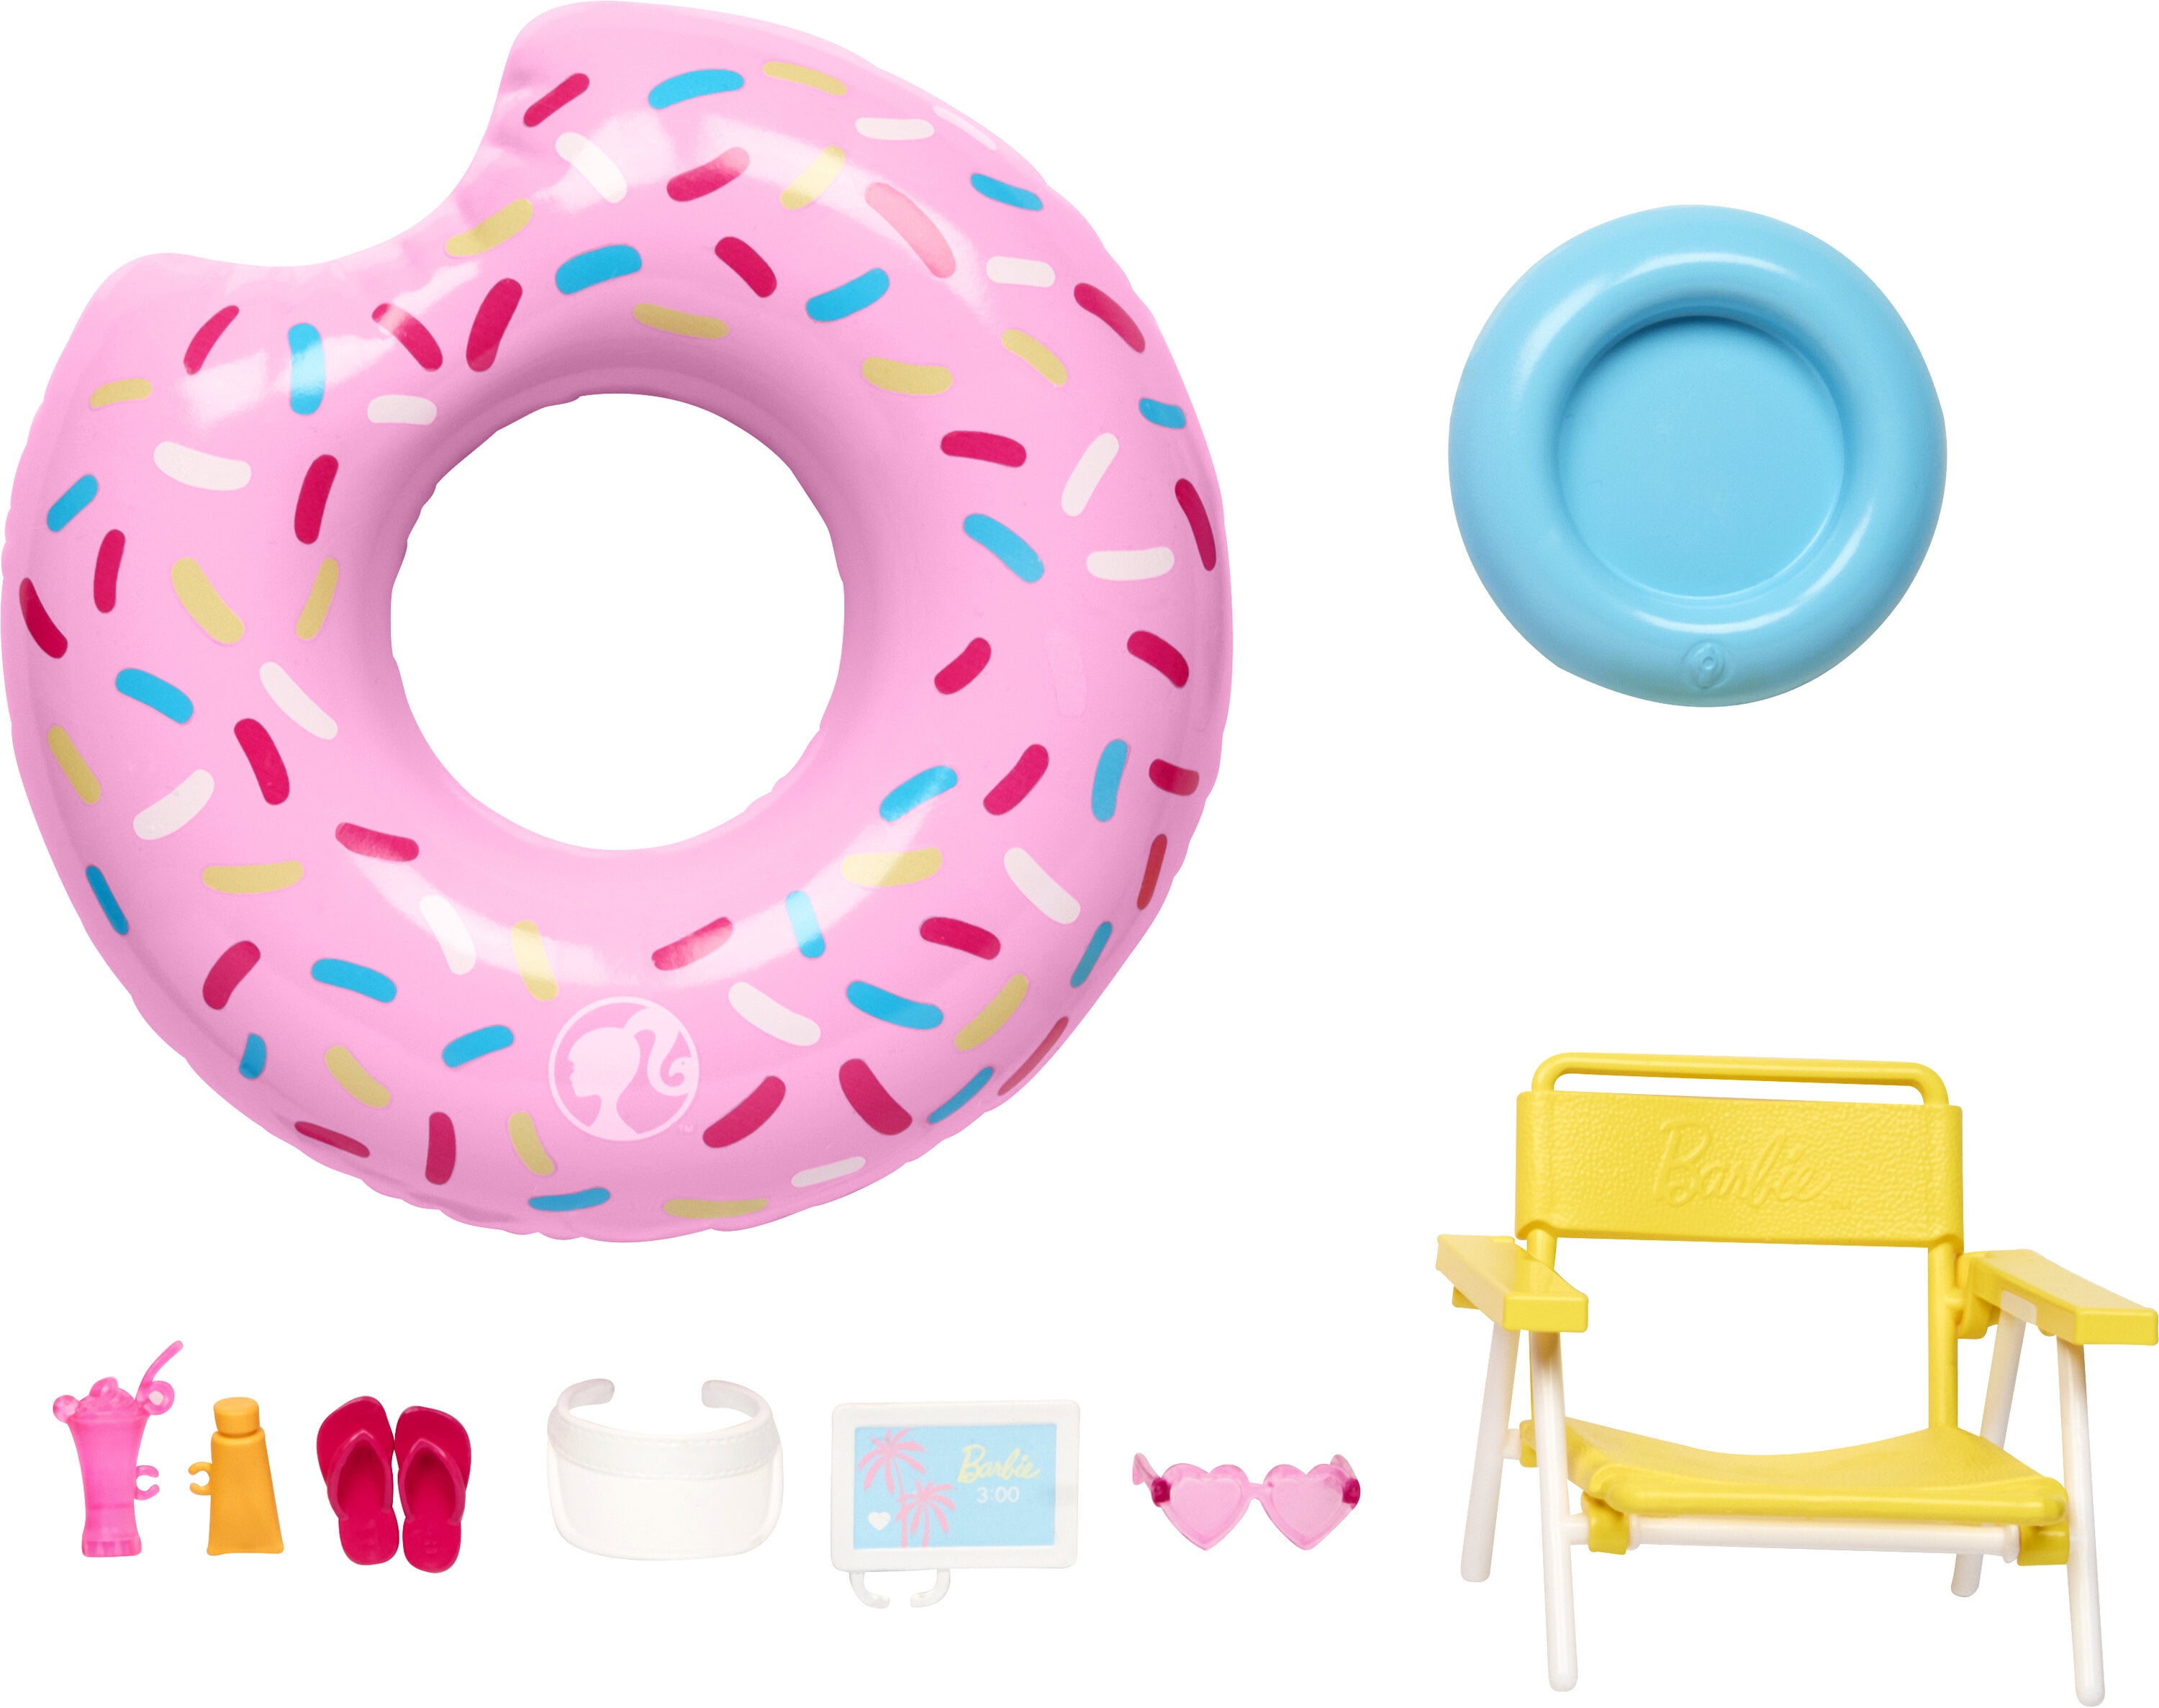 Barbie Accessories, Doll House Furniture, Smoothie Bar Story Starter